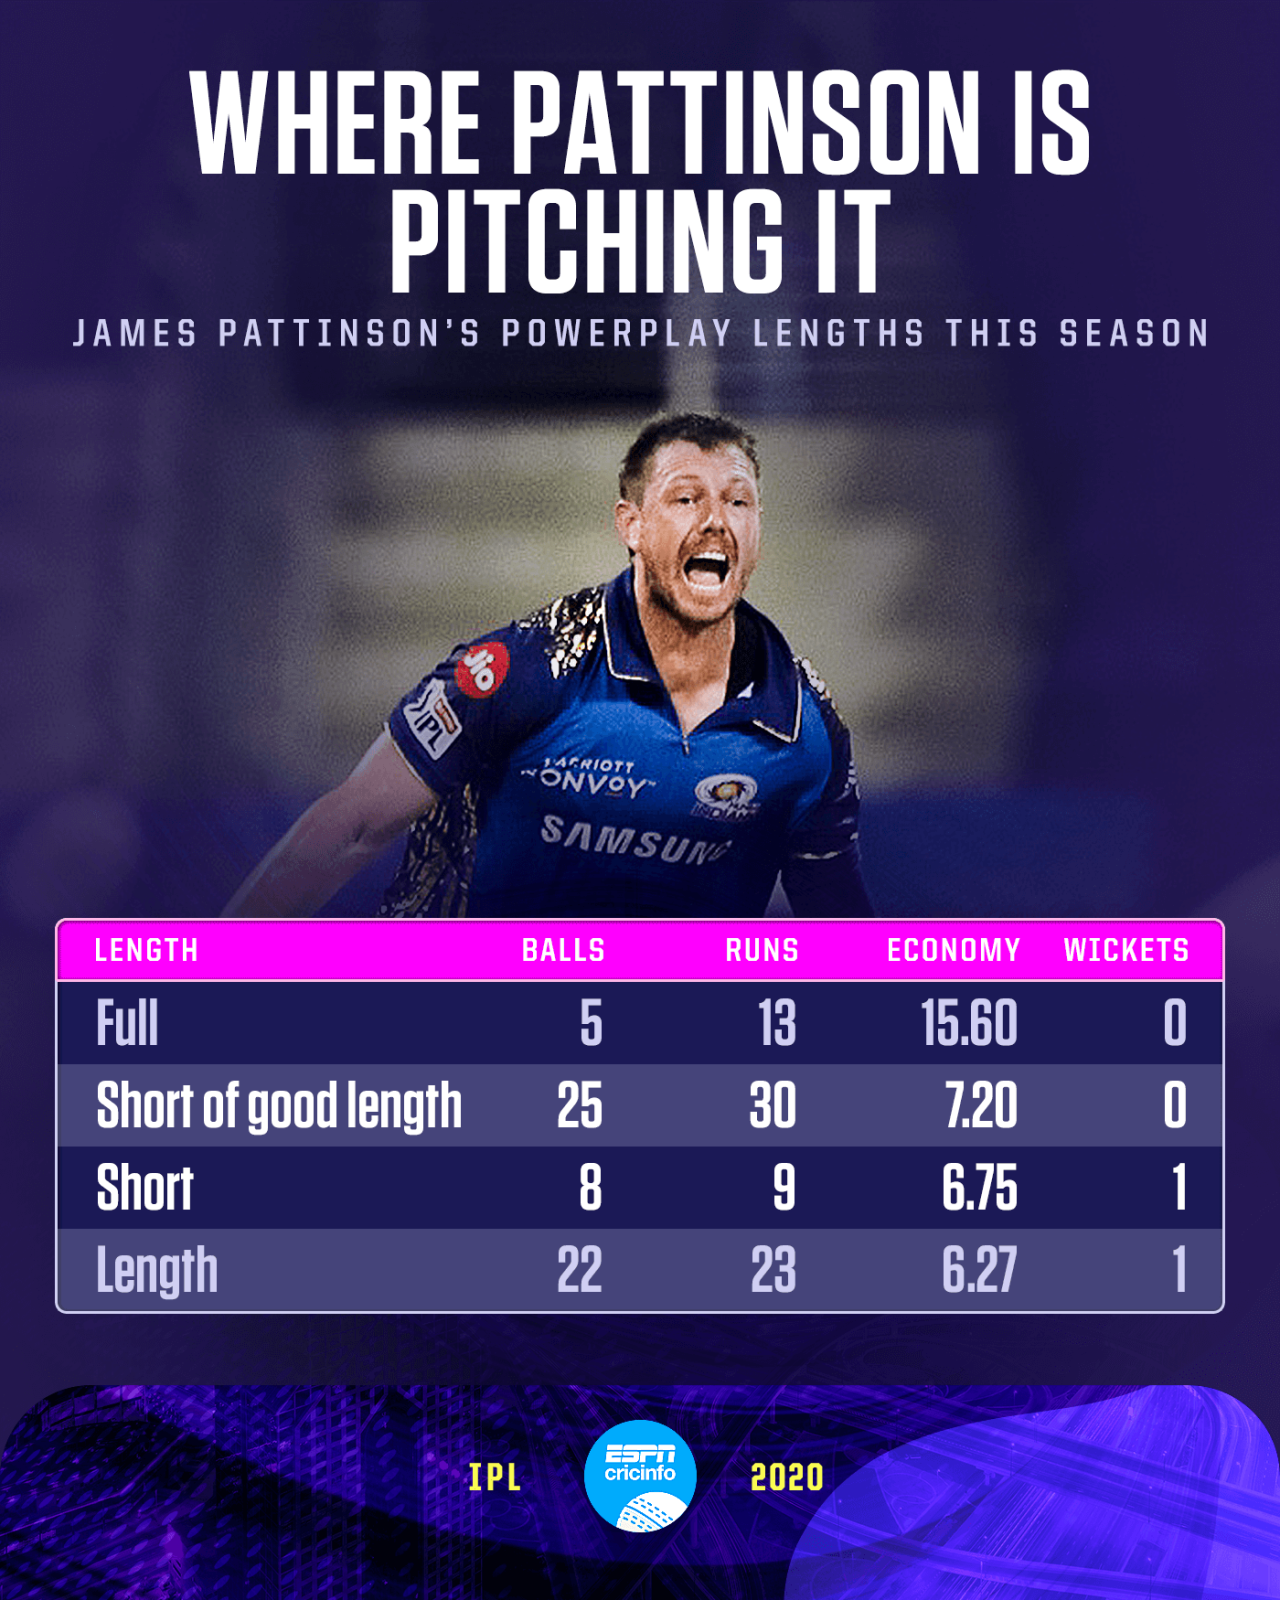 James Pattinson has bowled 10 overs in the powerplay in six games